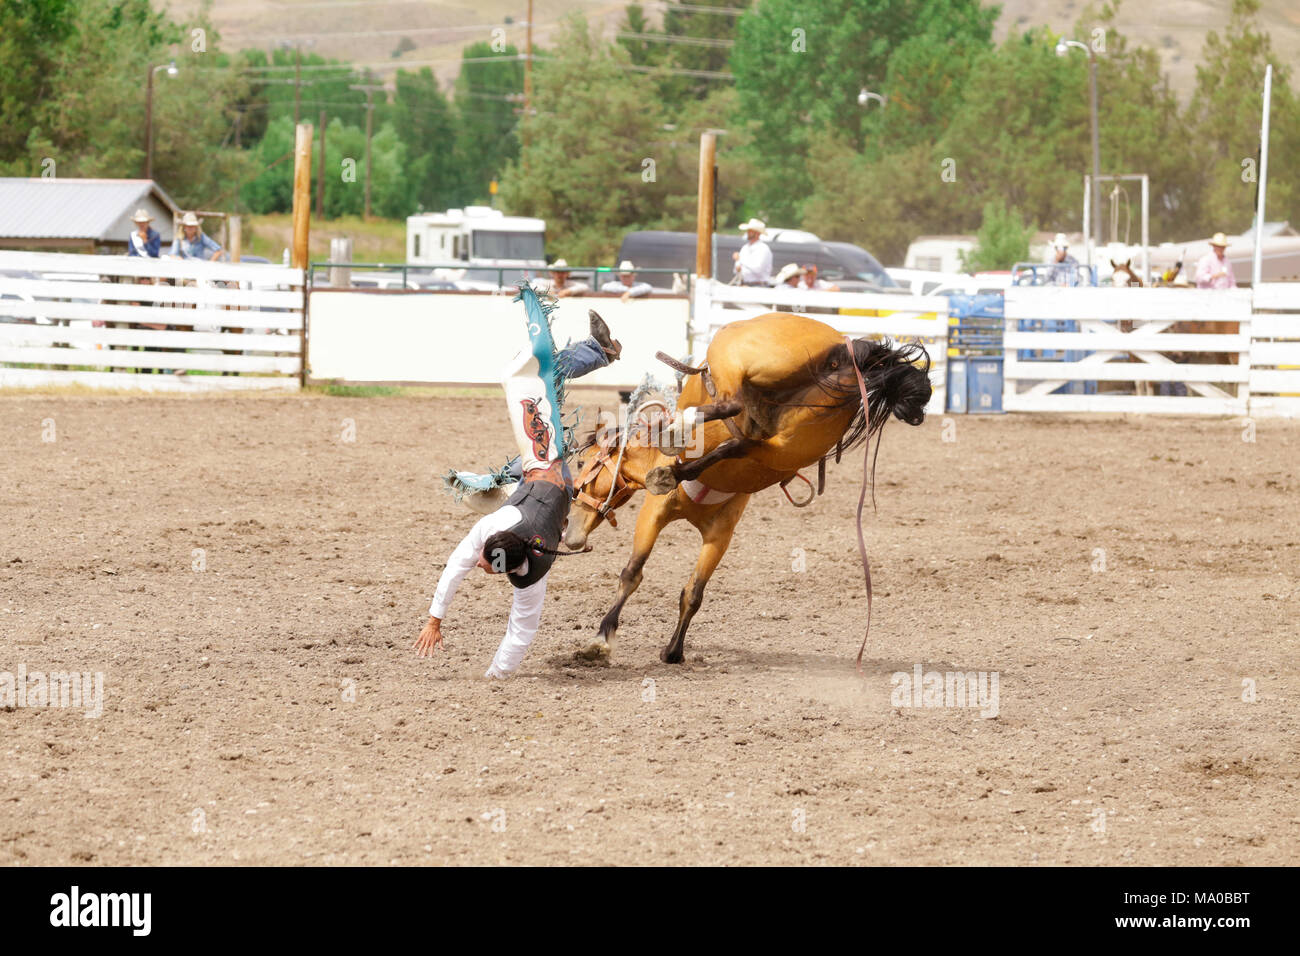 Bronc rider is going to have a hard landing Stock Photo